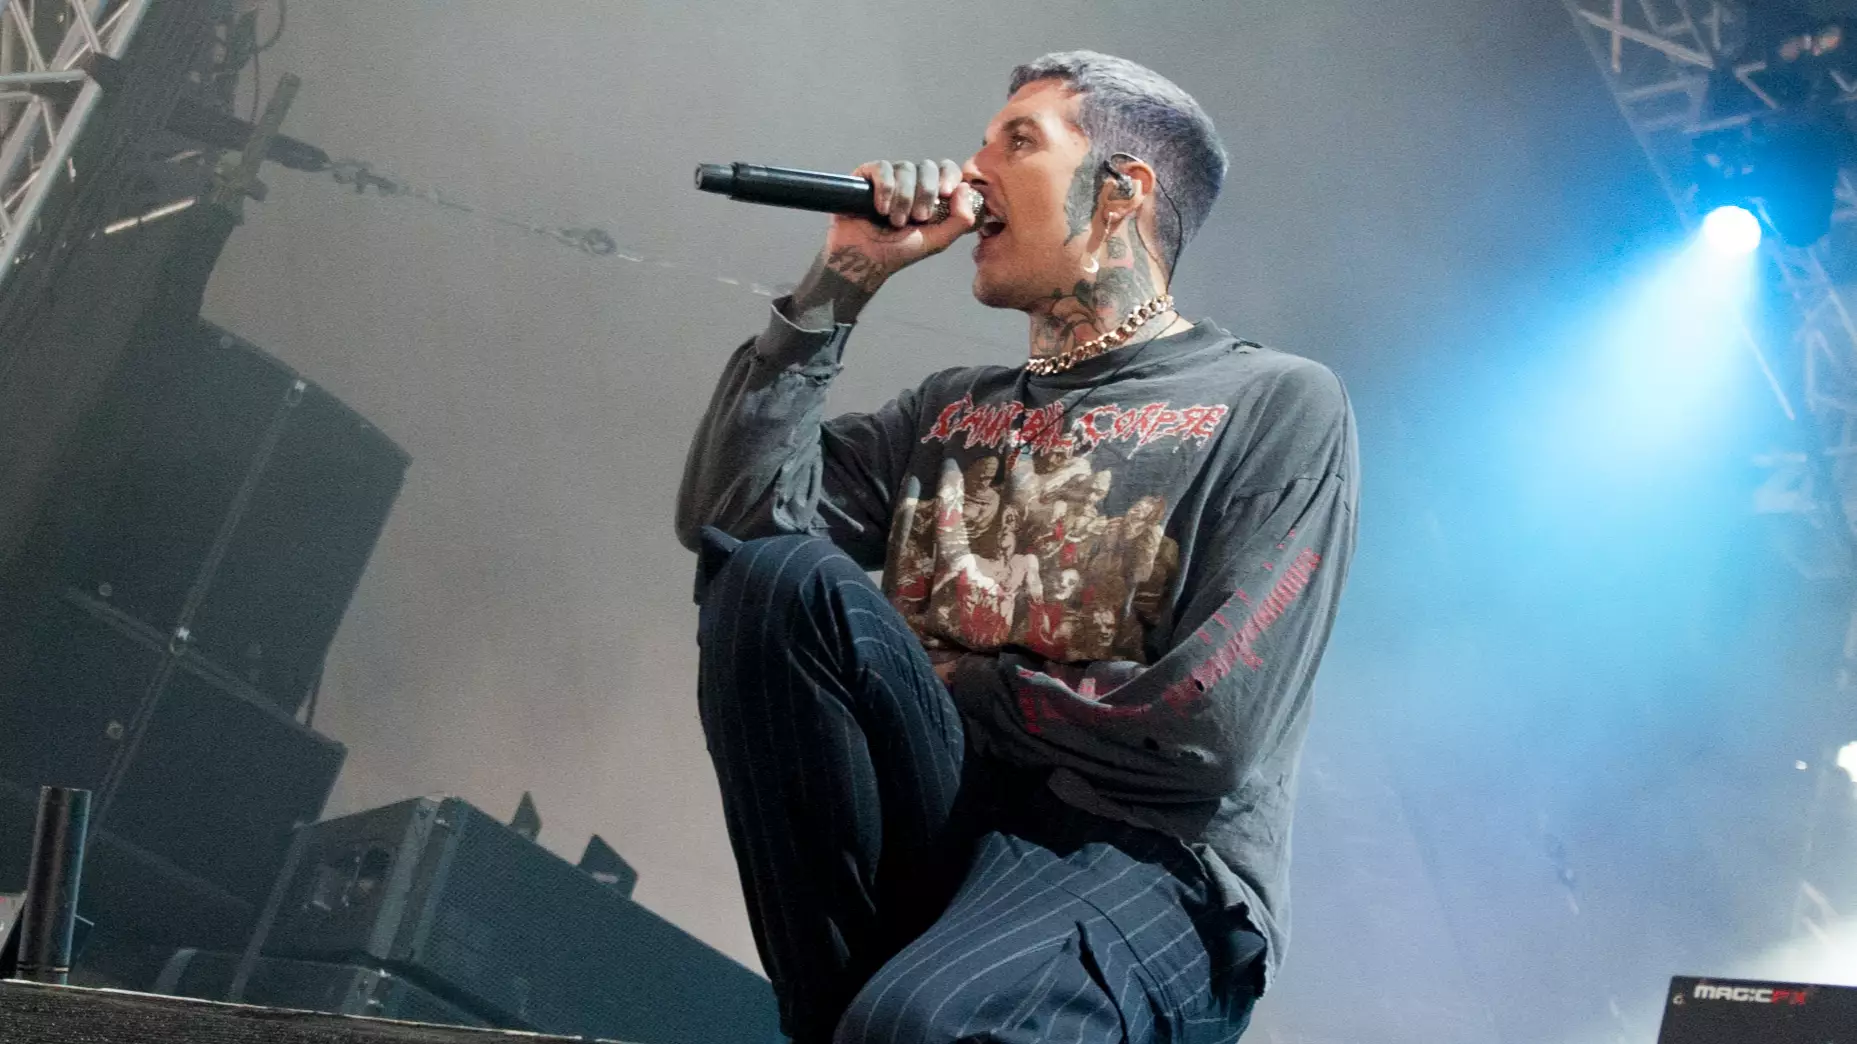 Bring Me The Horizon ‘Horrified’ Over Death Of Fan At London Show